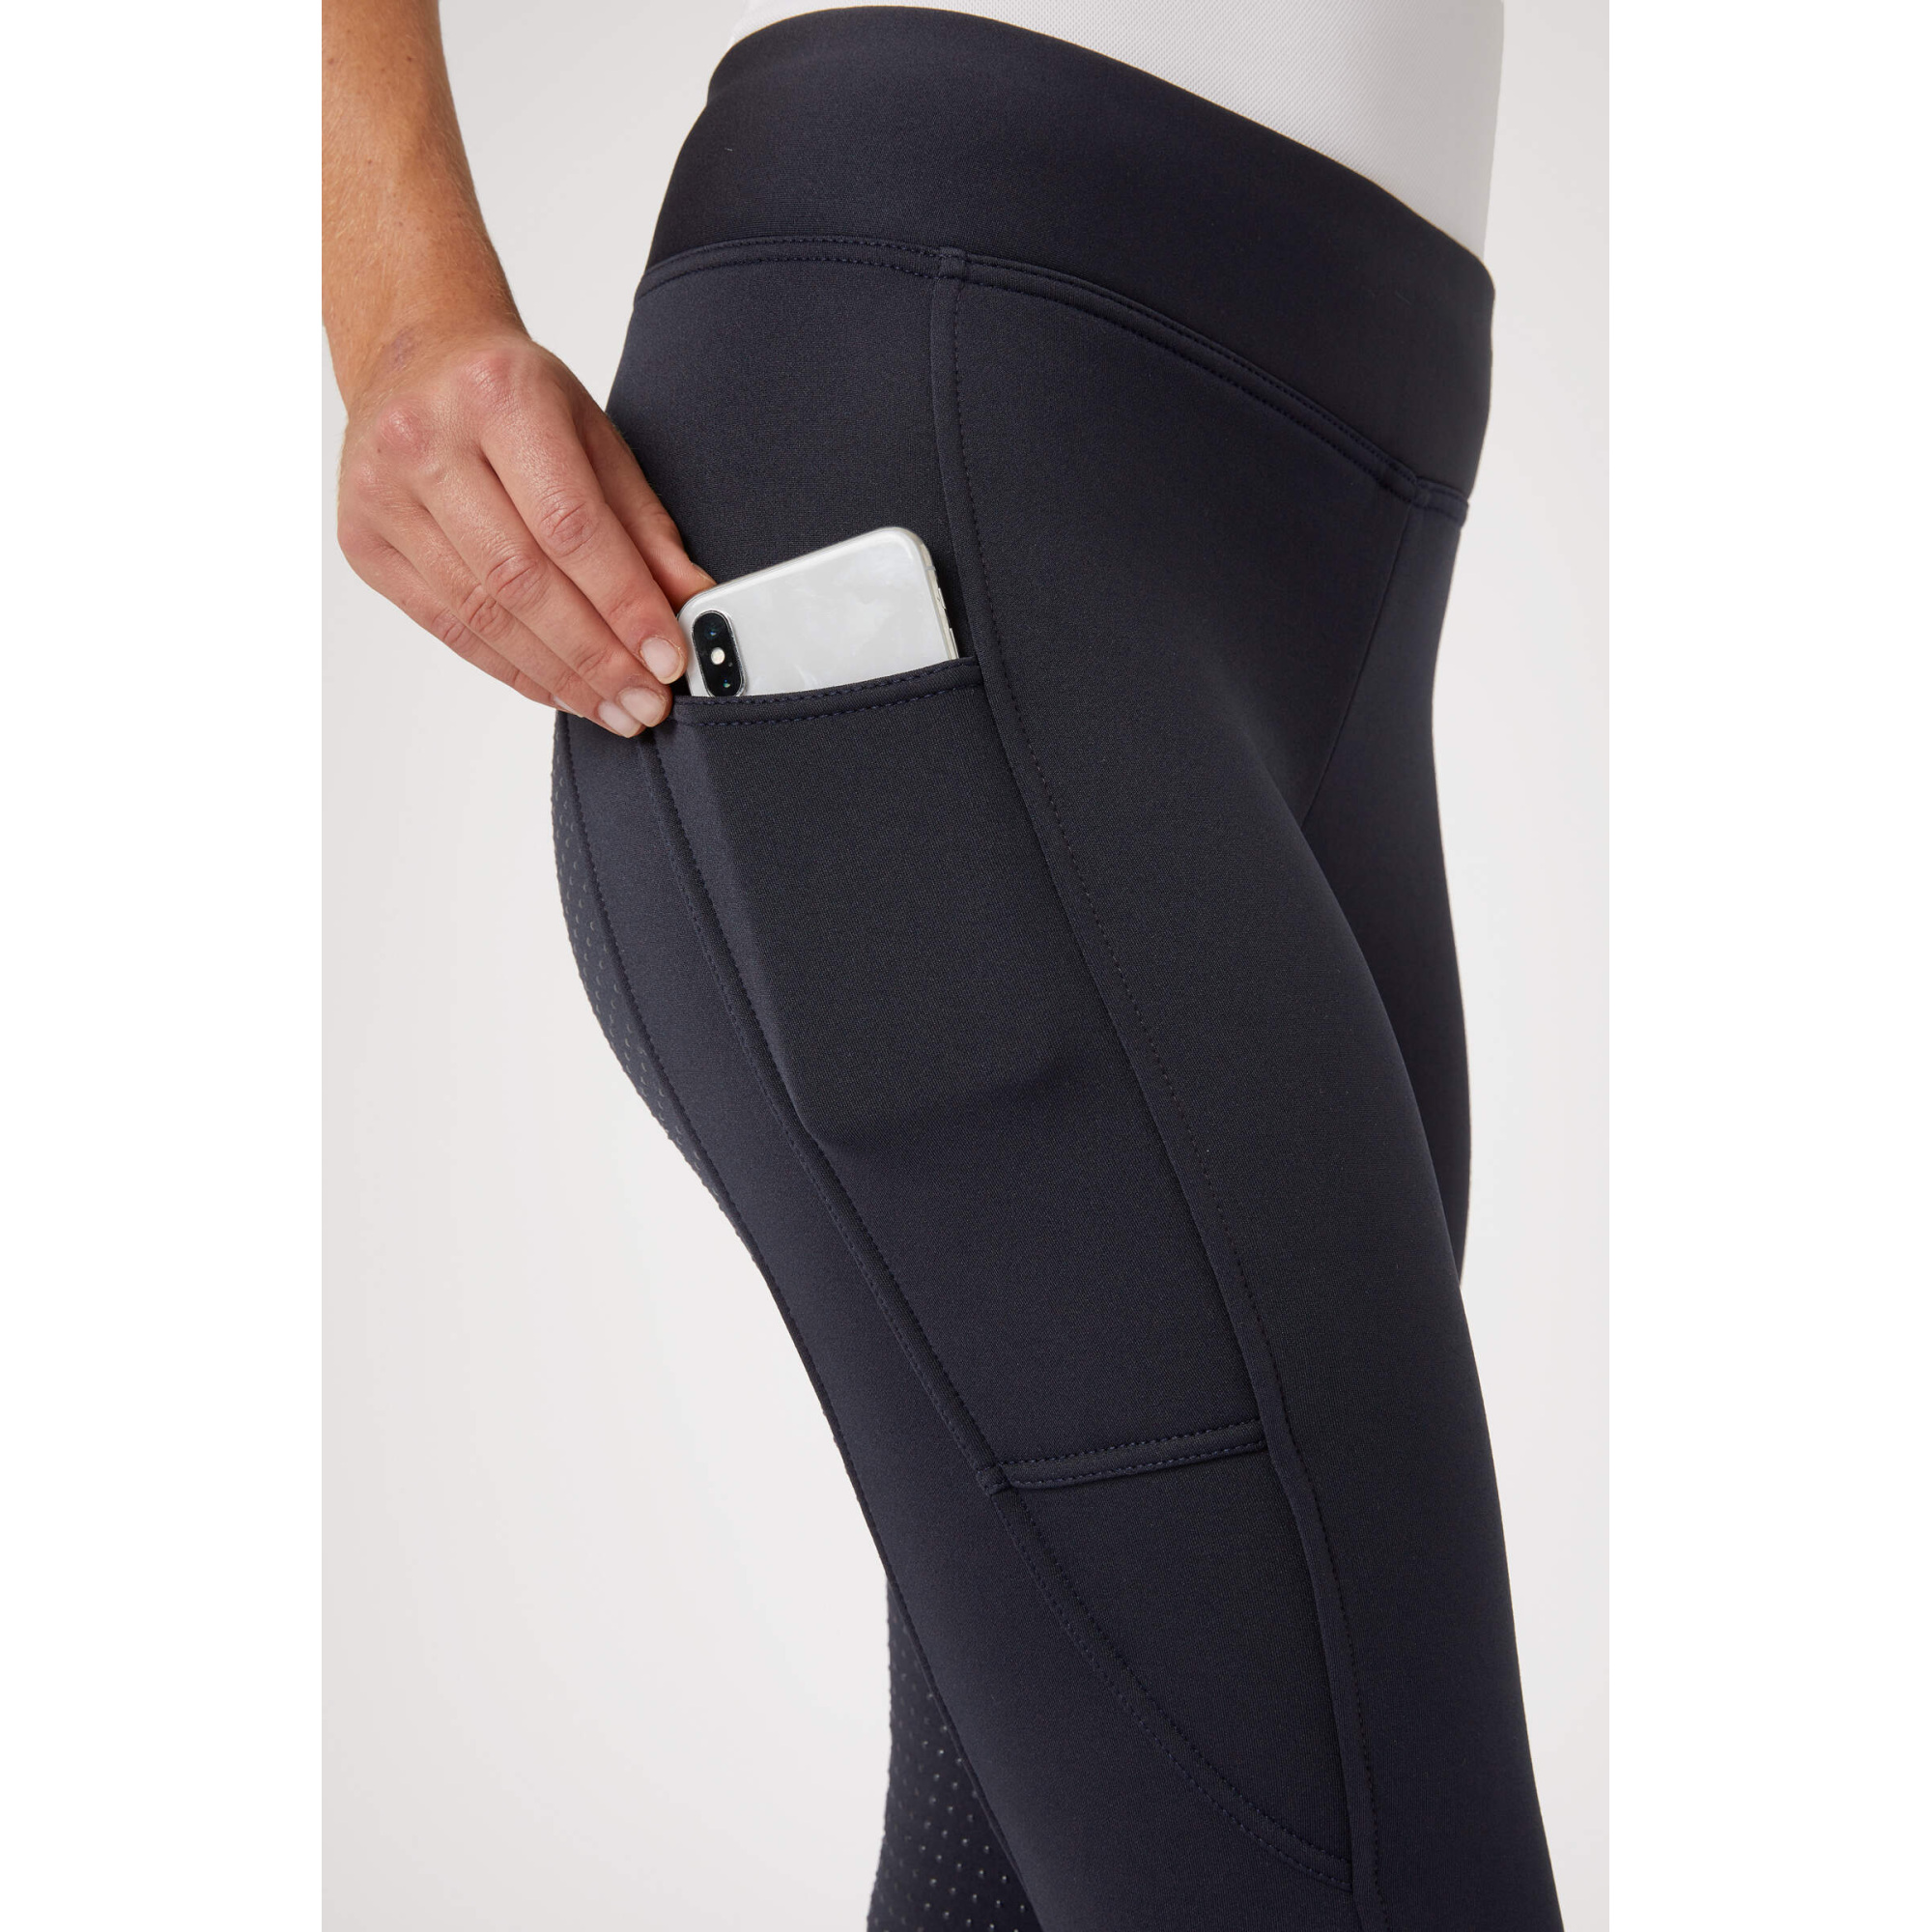 HORZE ACTIVE WOMEN'S FULL GRIP WINTER RIDING TIGHTS WITH PHONE